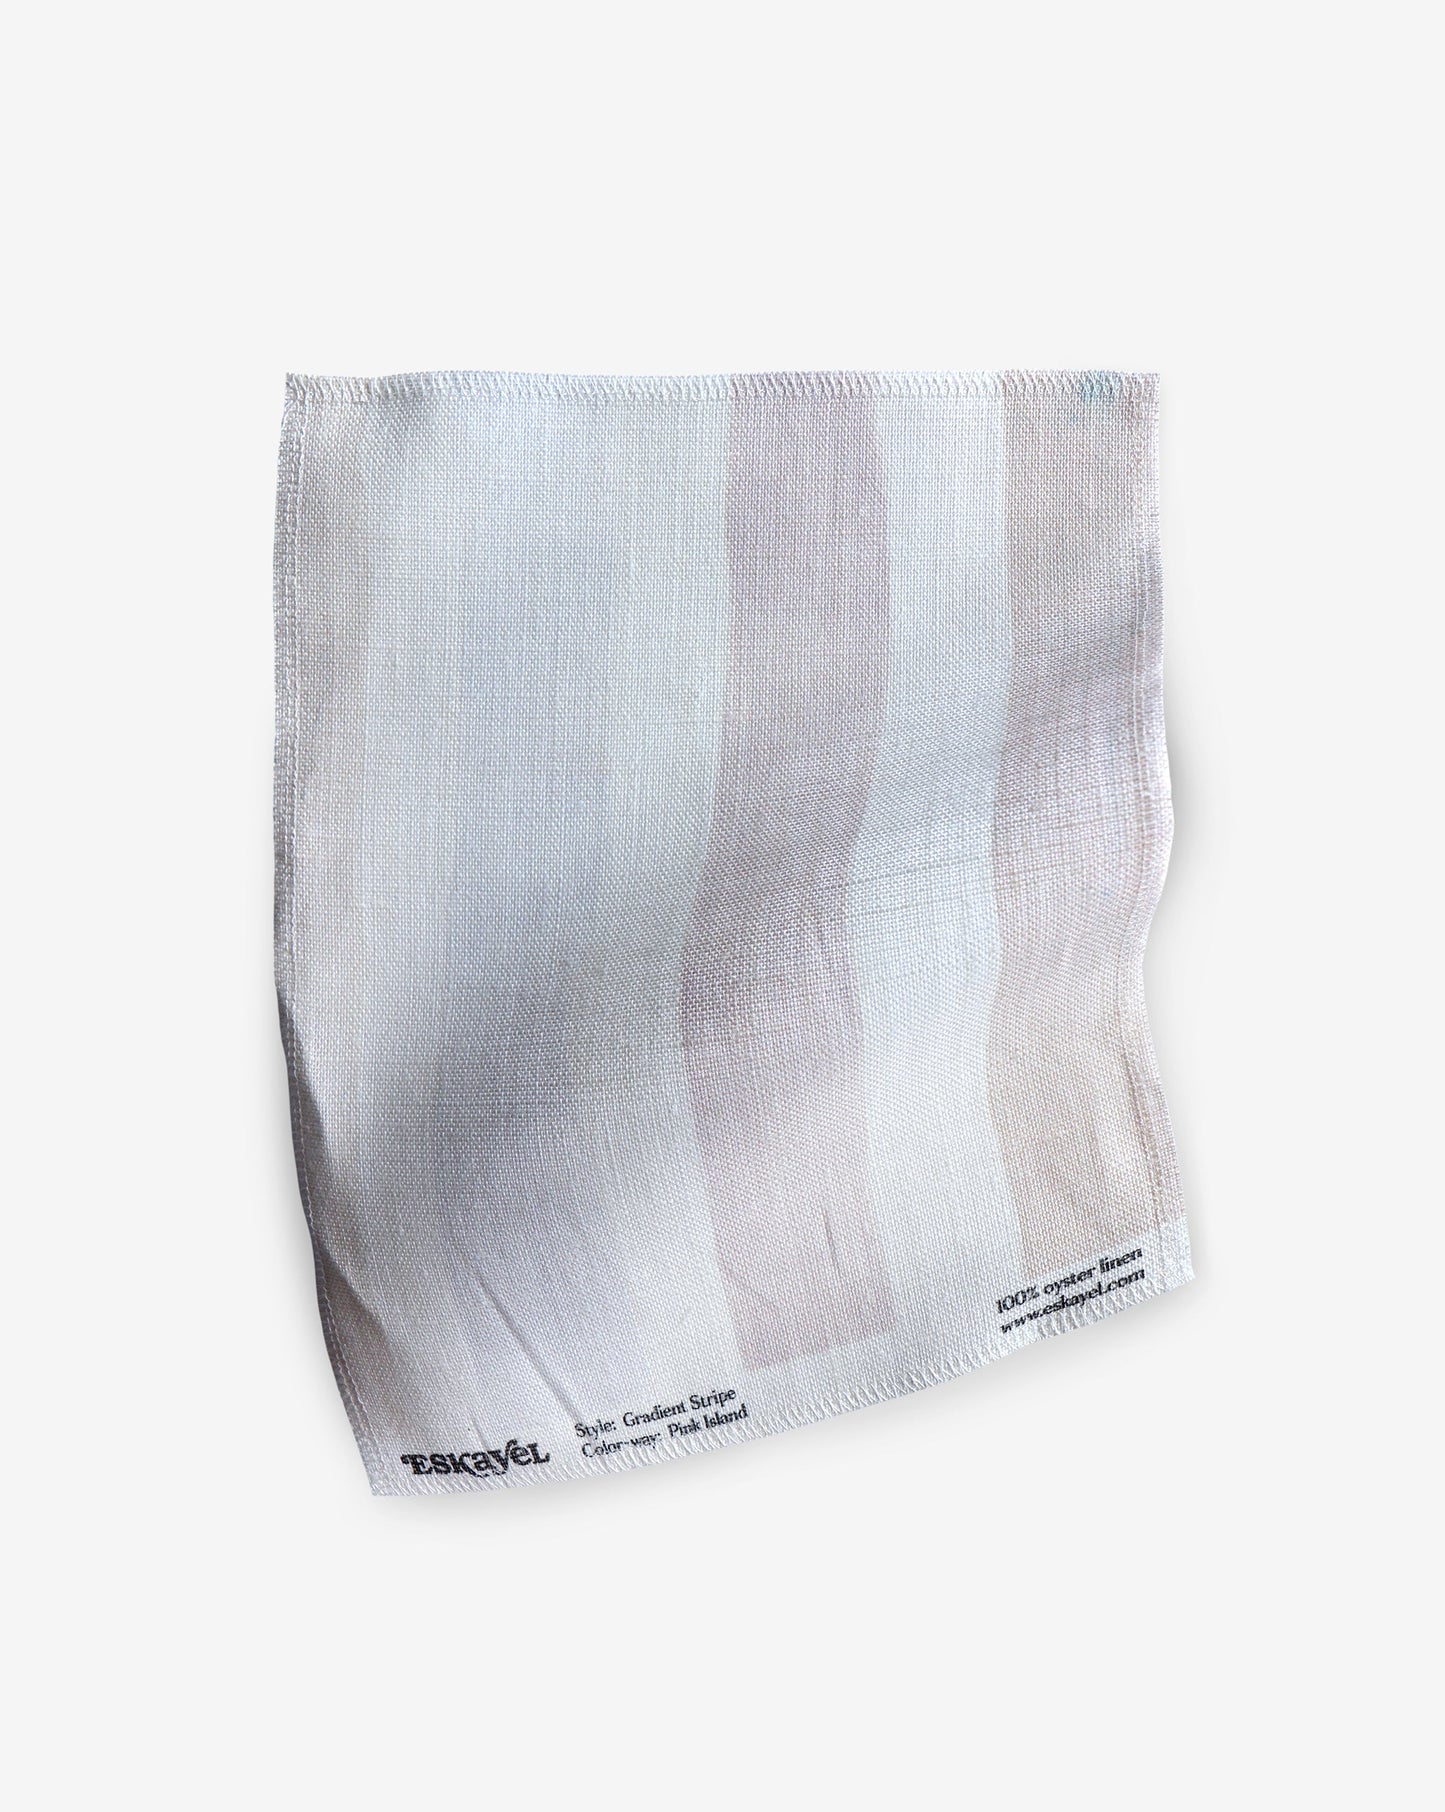 A fabric with a enduring design featuring Gradient Stripe Fabric Pink Island